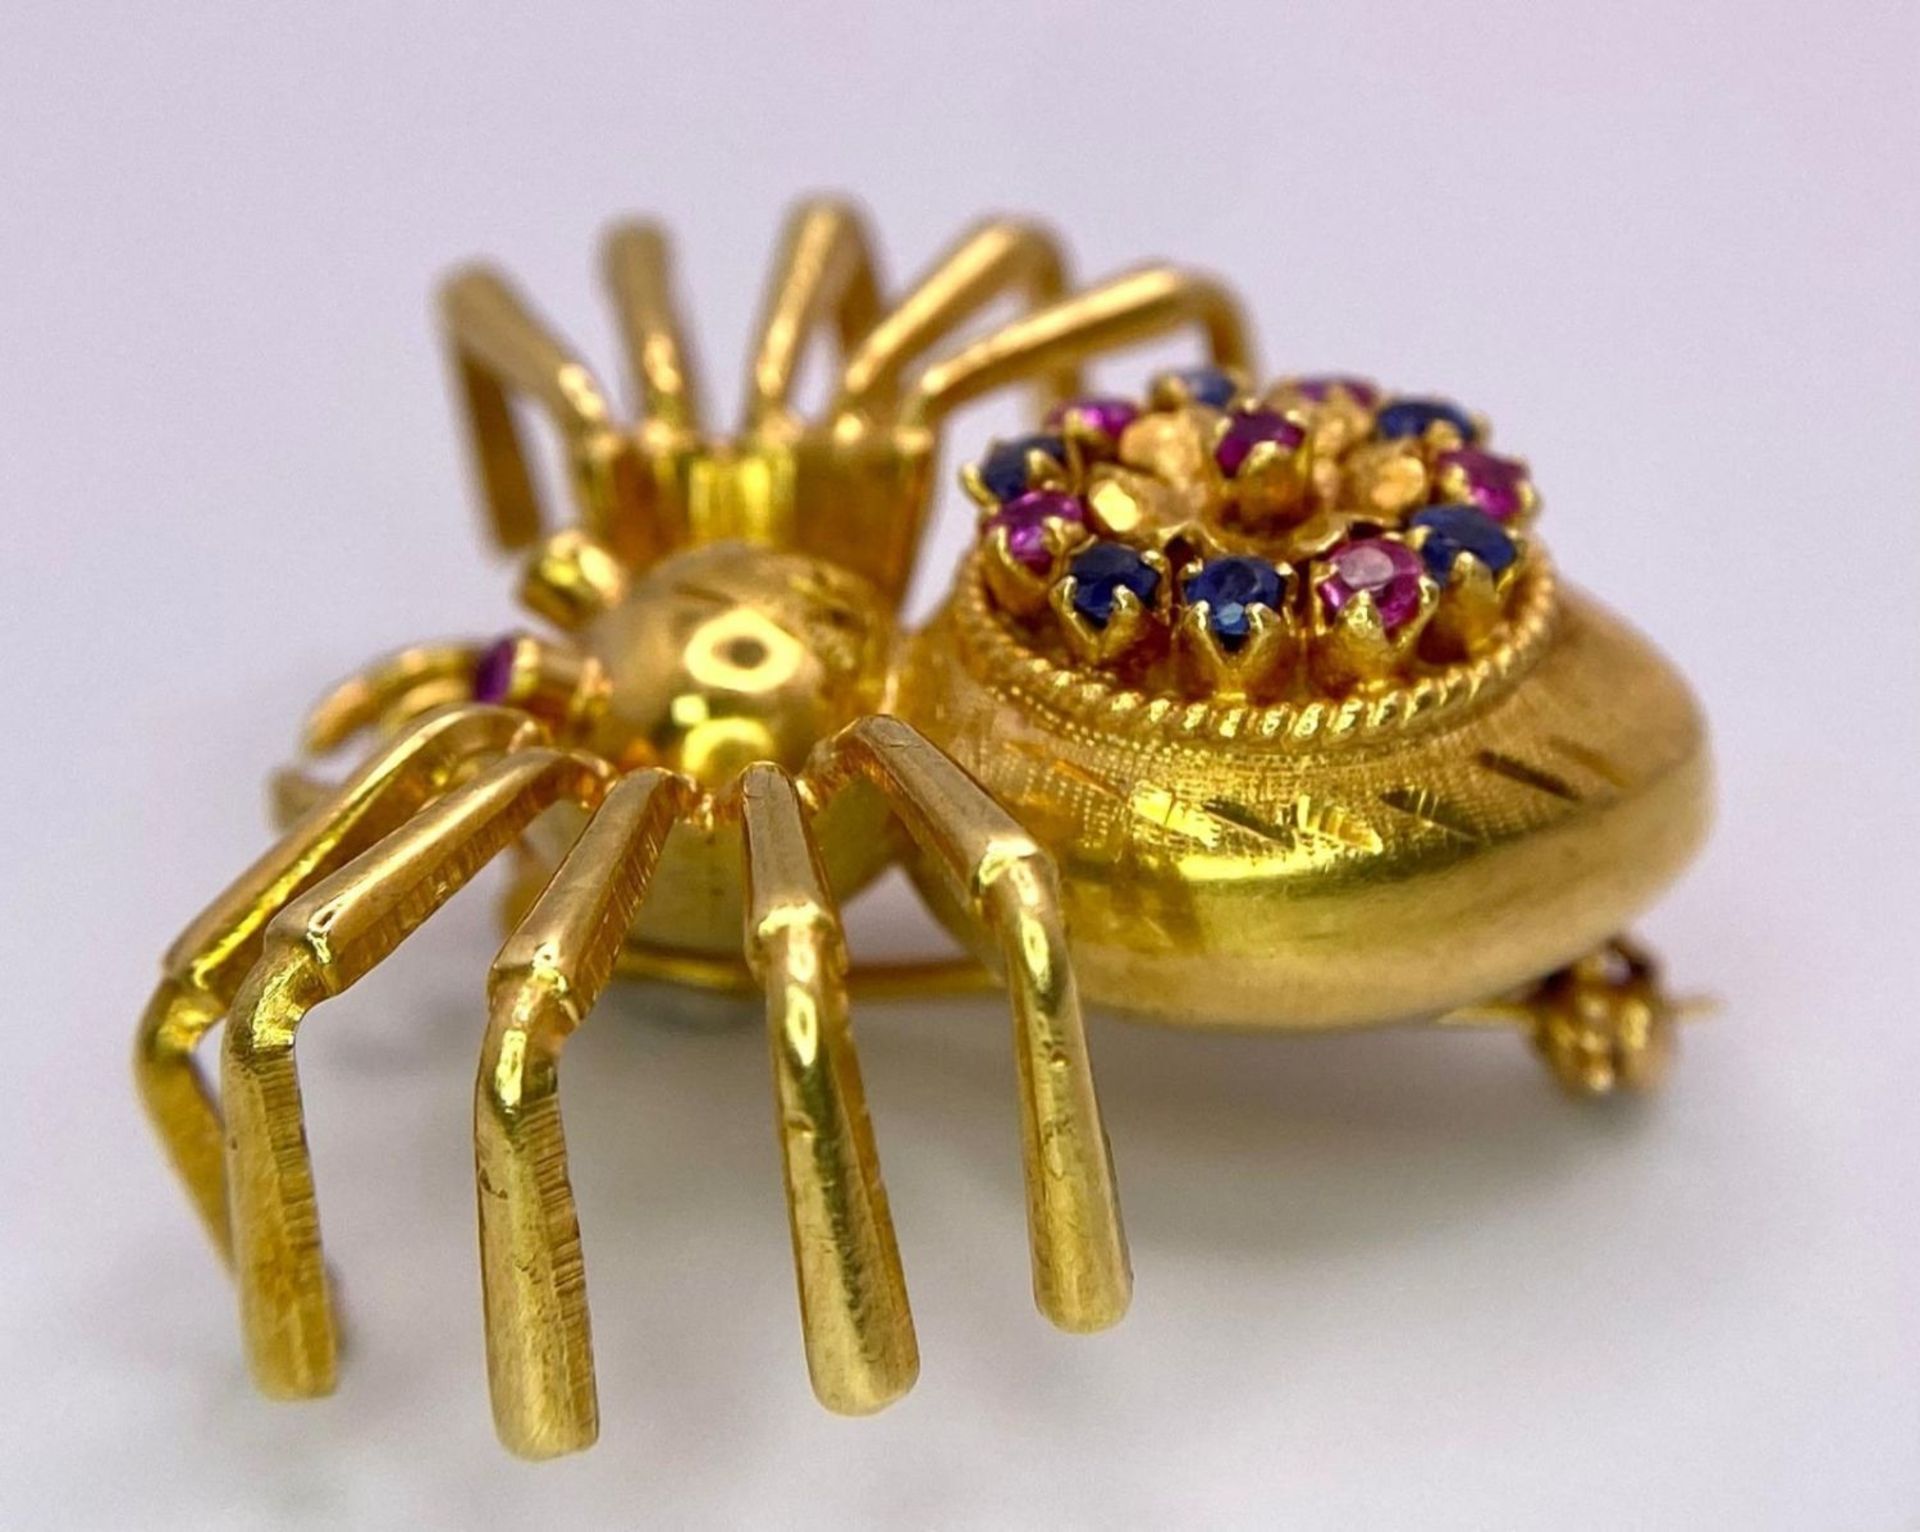 The Richest Spider in the World! 18K Yellow Gold, Sapphires and Rubies Create a Brooch/Pendant - Image 3 of 6